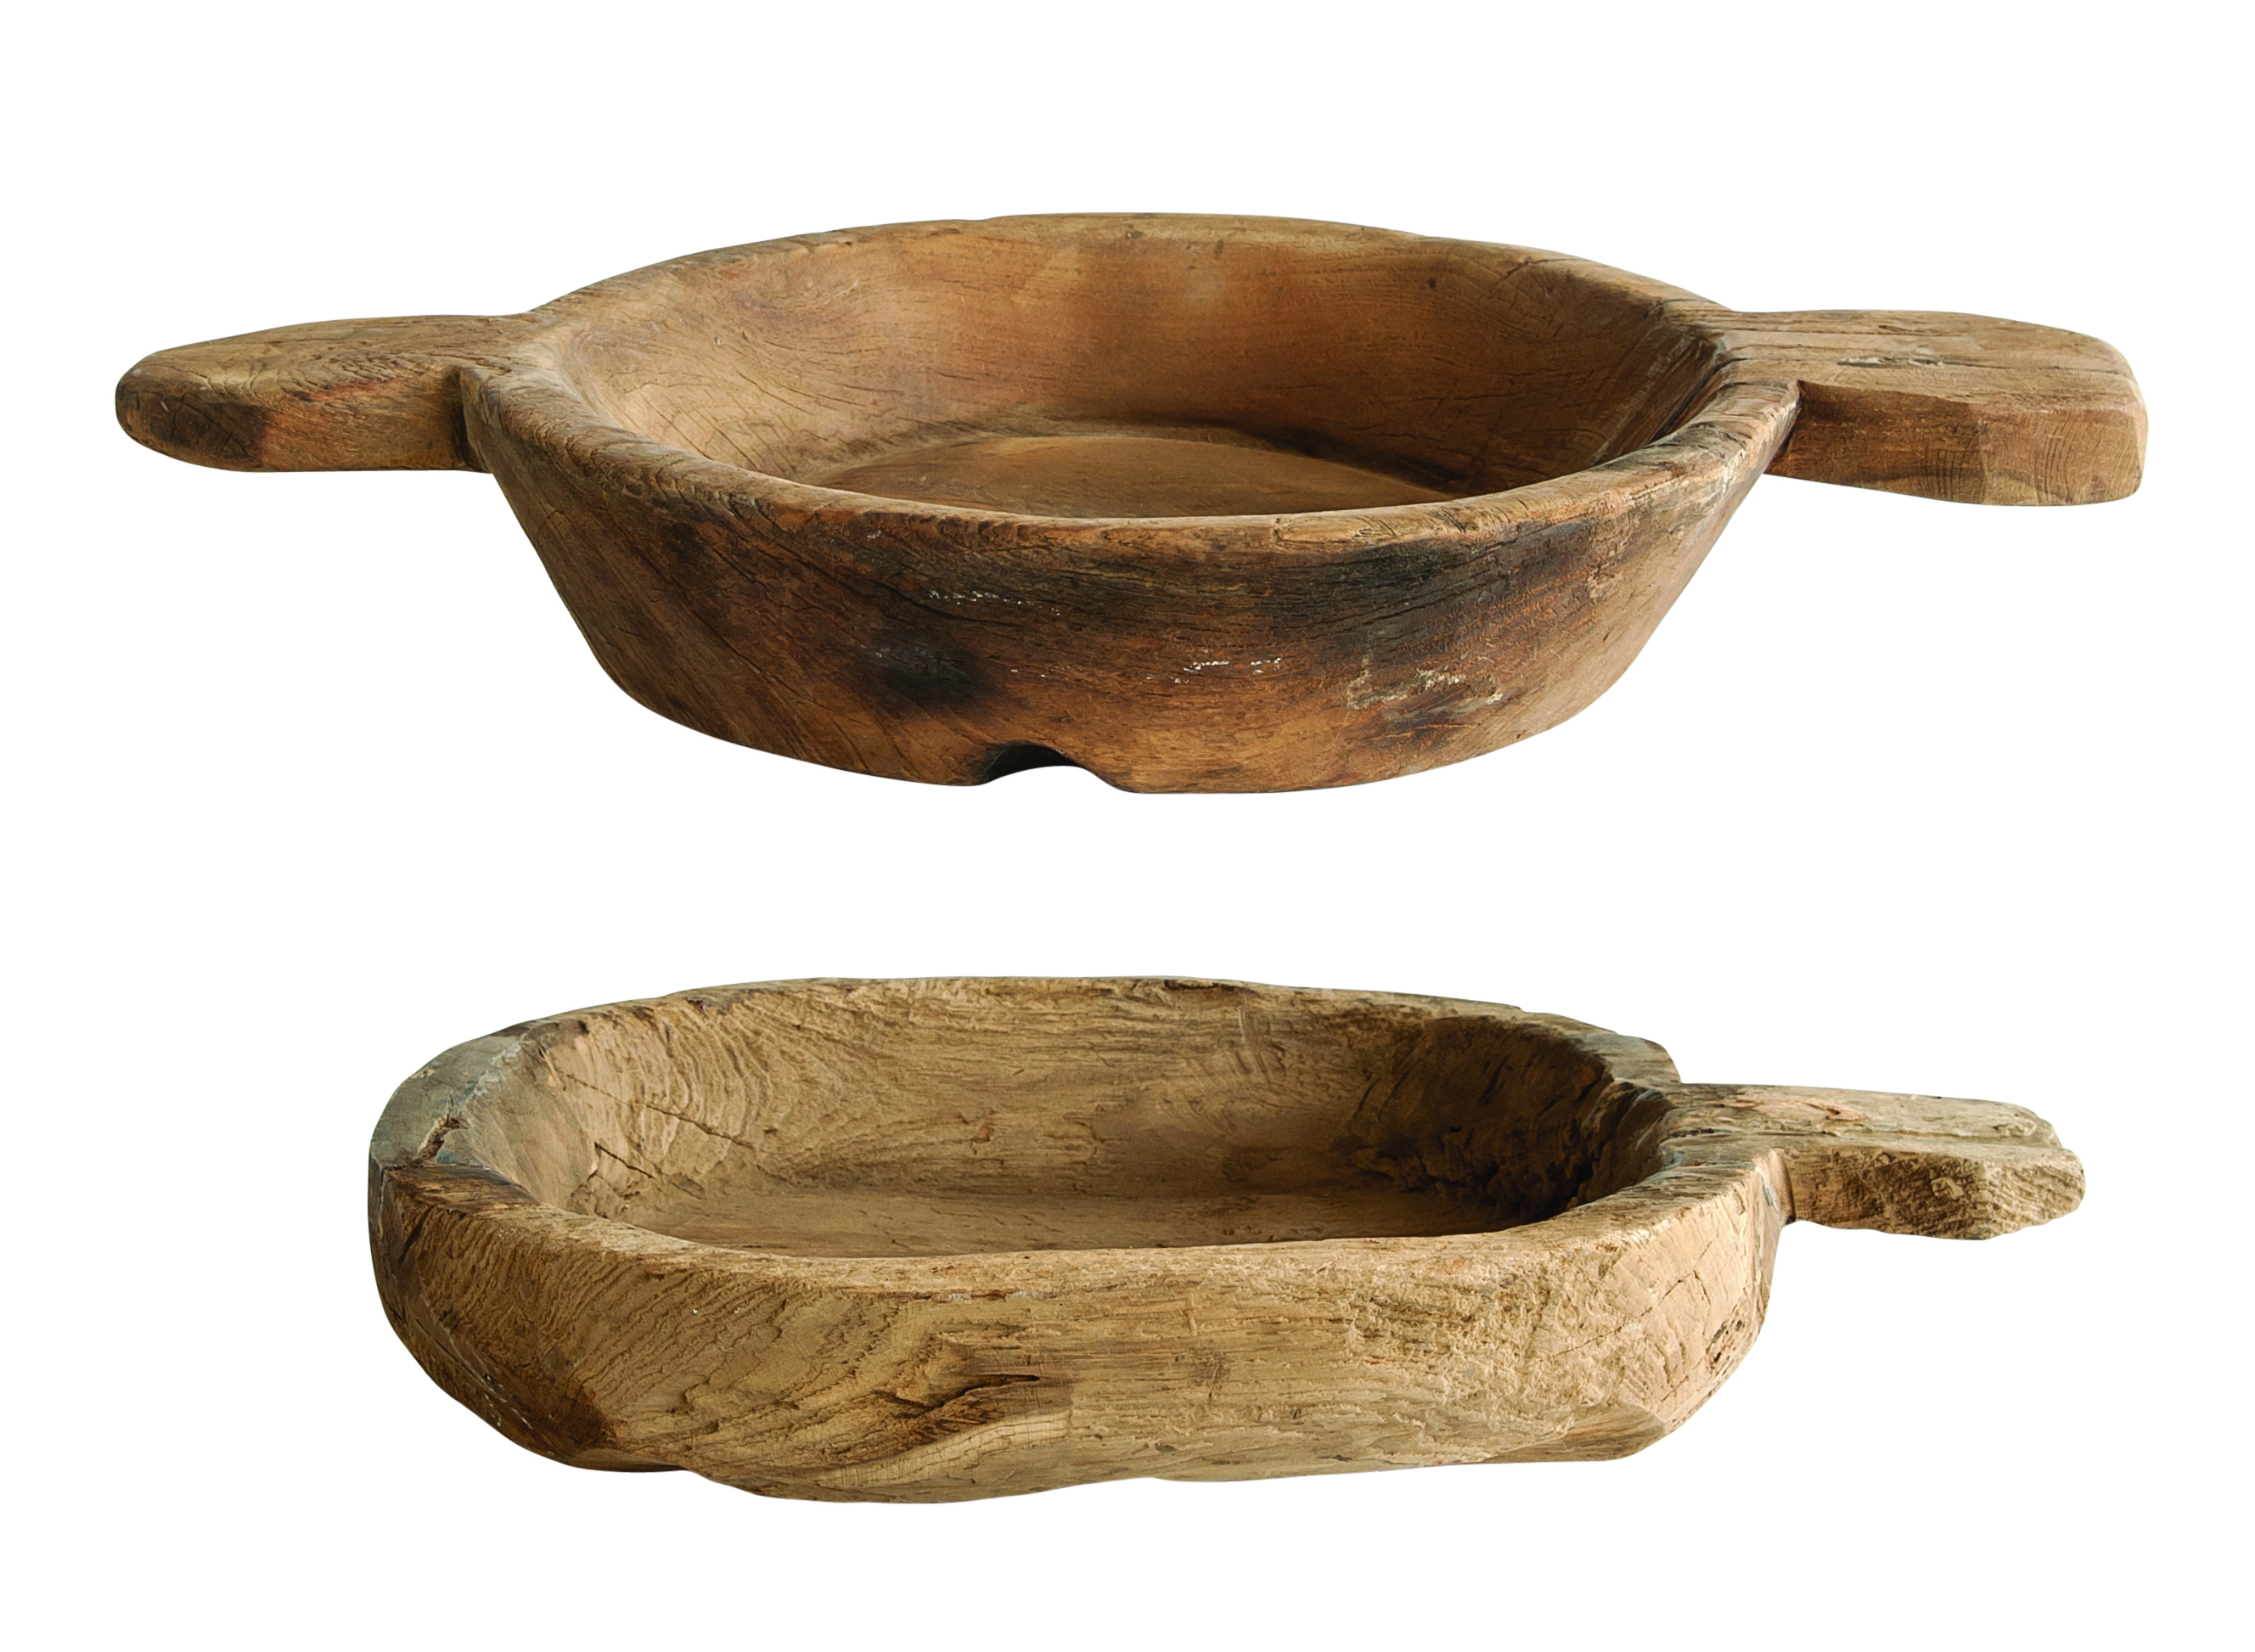 Found Decorative Brown Wood Bowl (Each one will vary) - Image 0